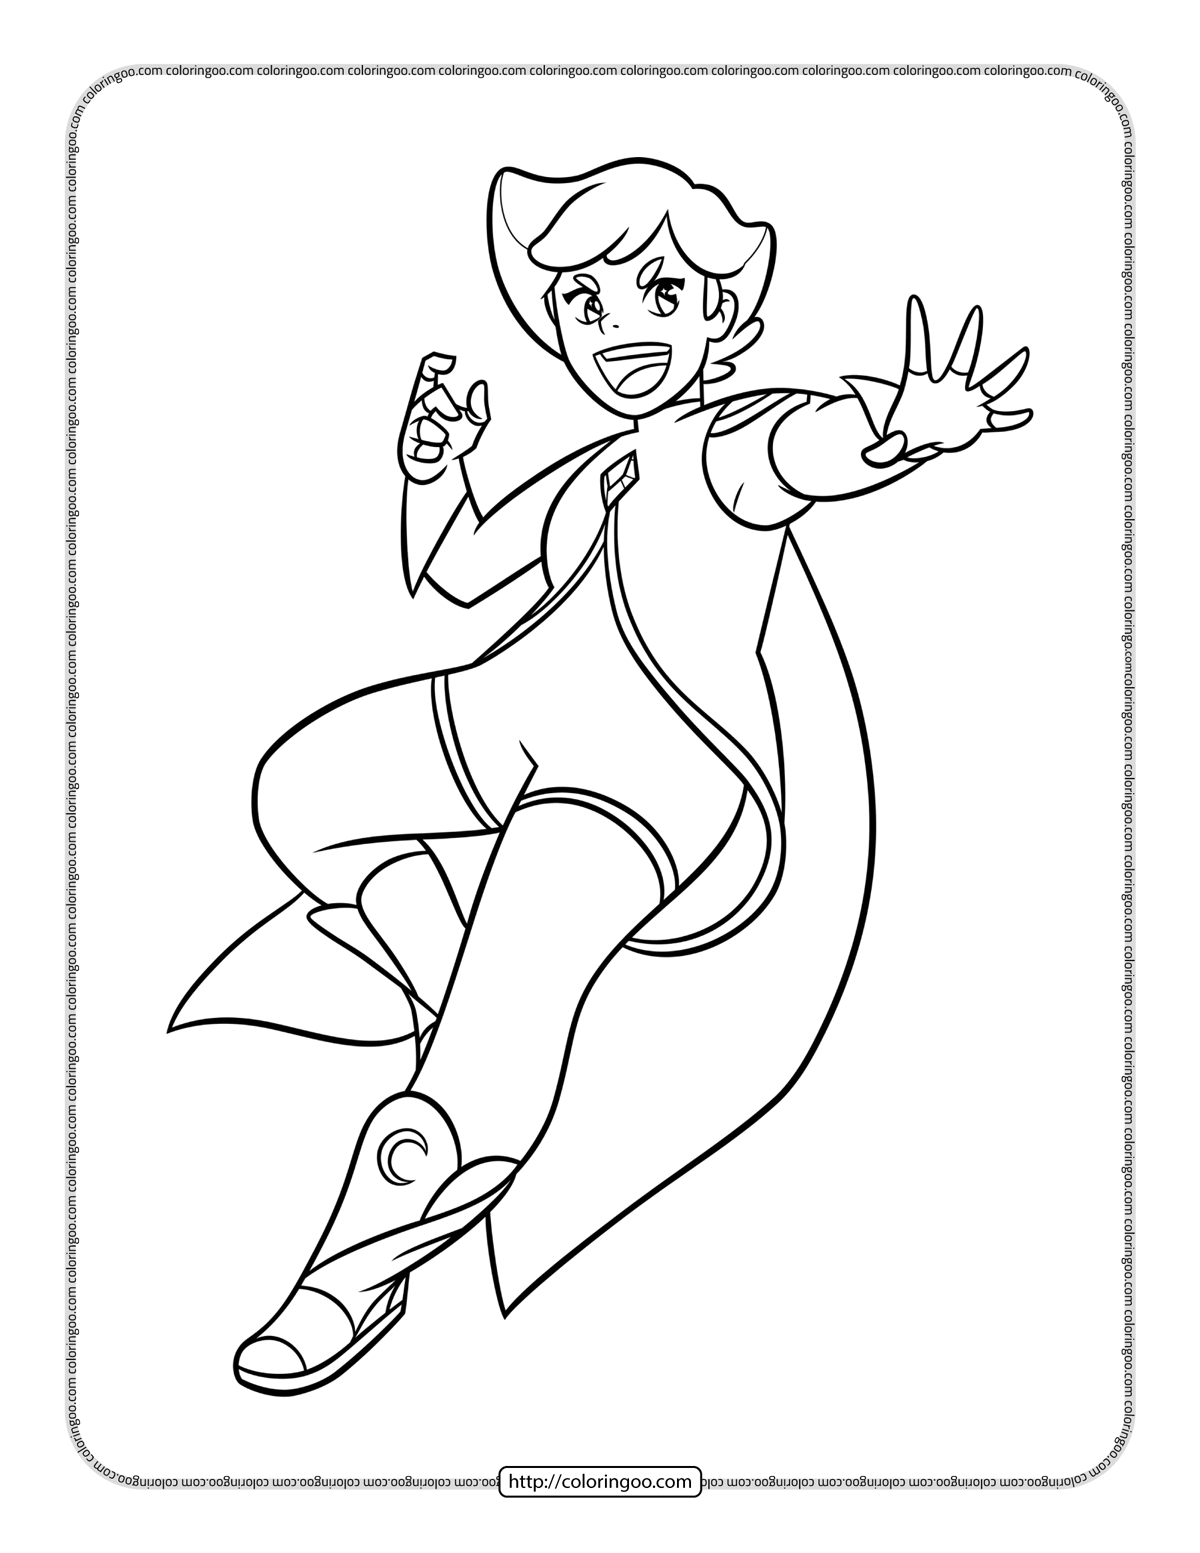 Glimmer She-Ra and The Princesses of Power Coloring Page